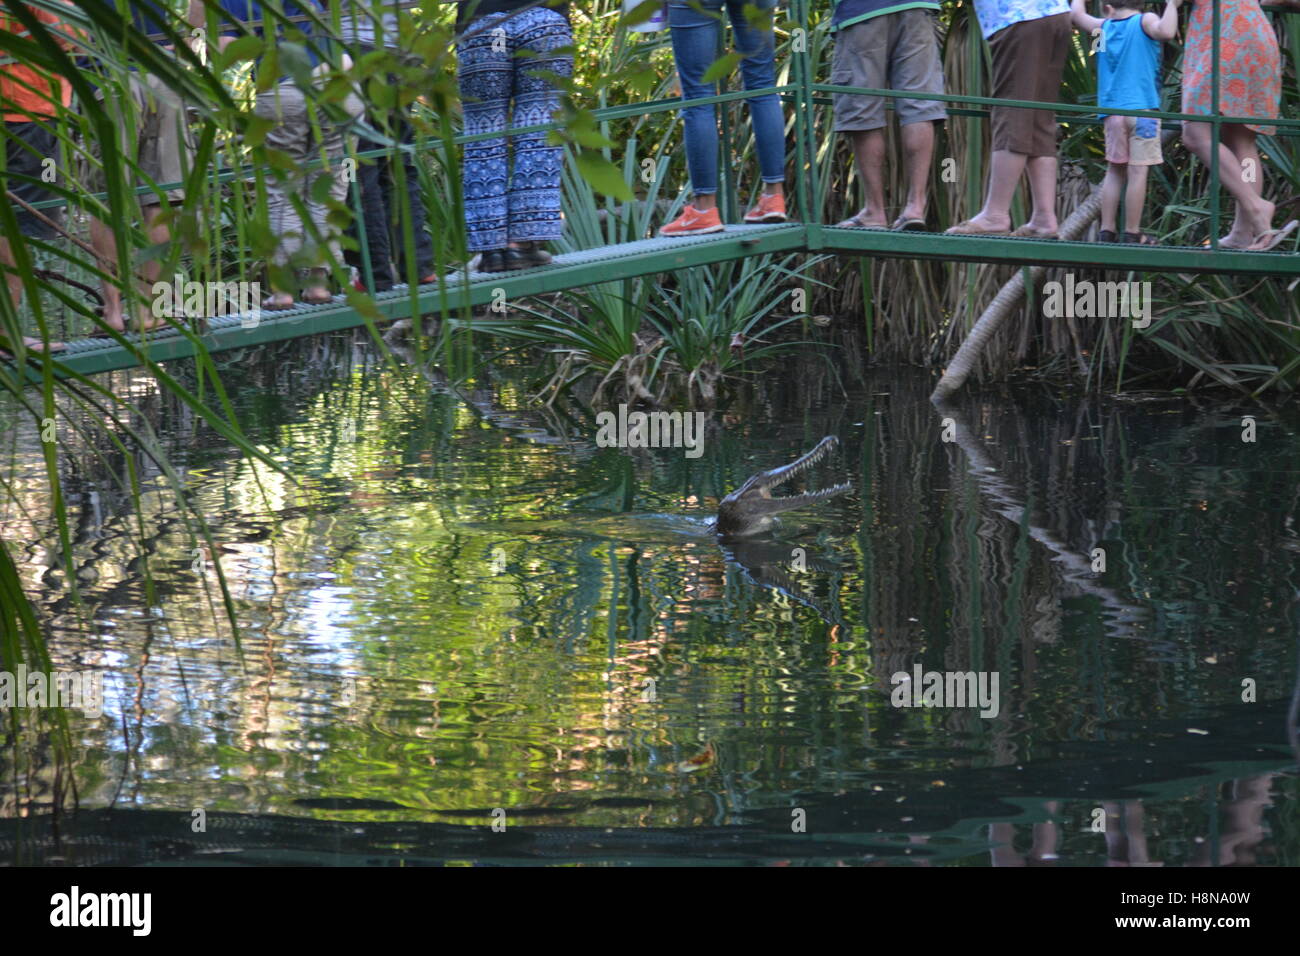 Crocodile about to be fed at Timber creek Australia Stock Photo